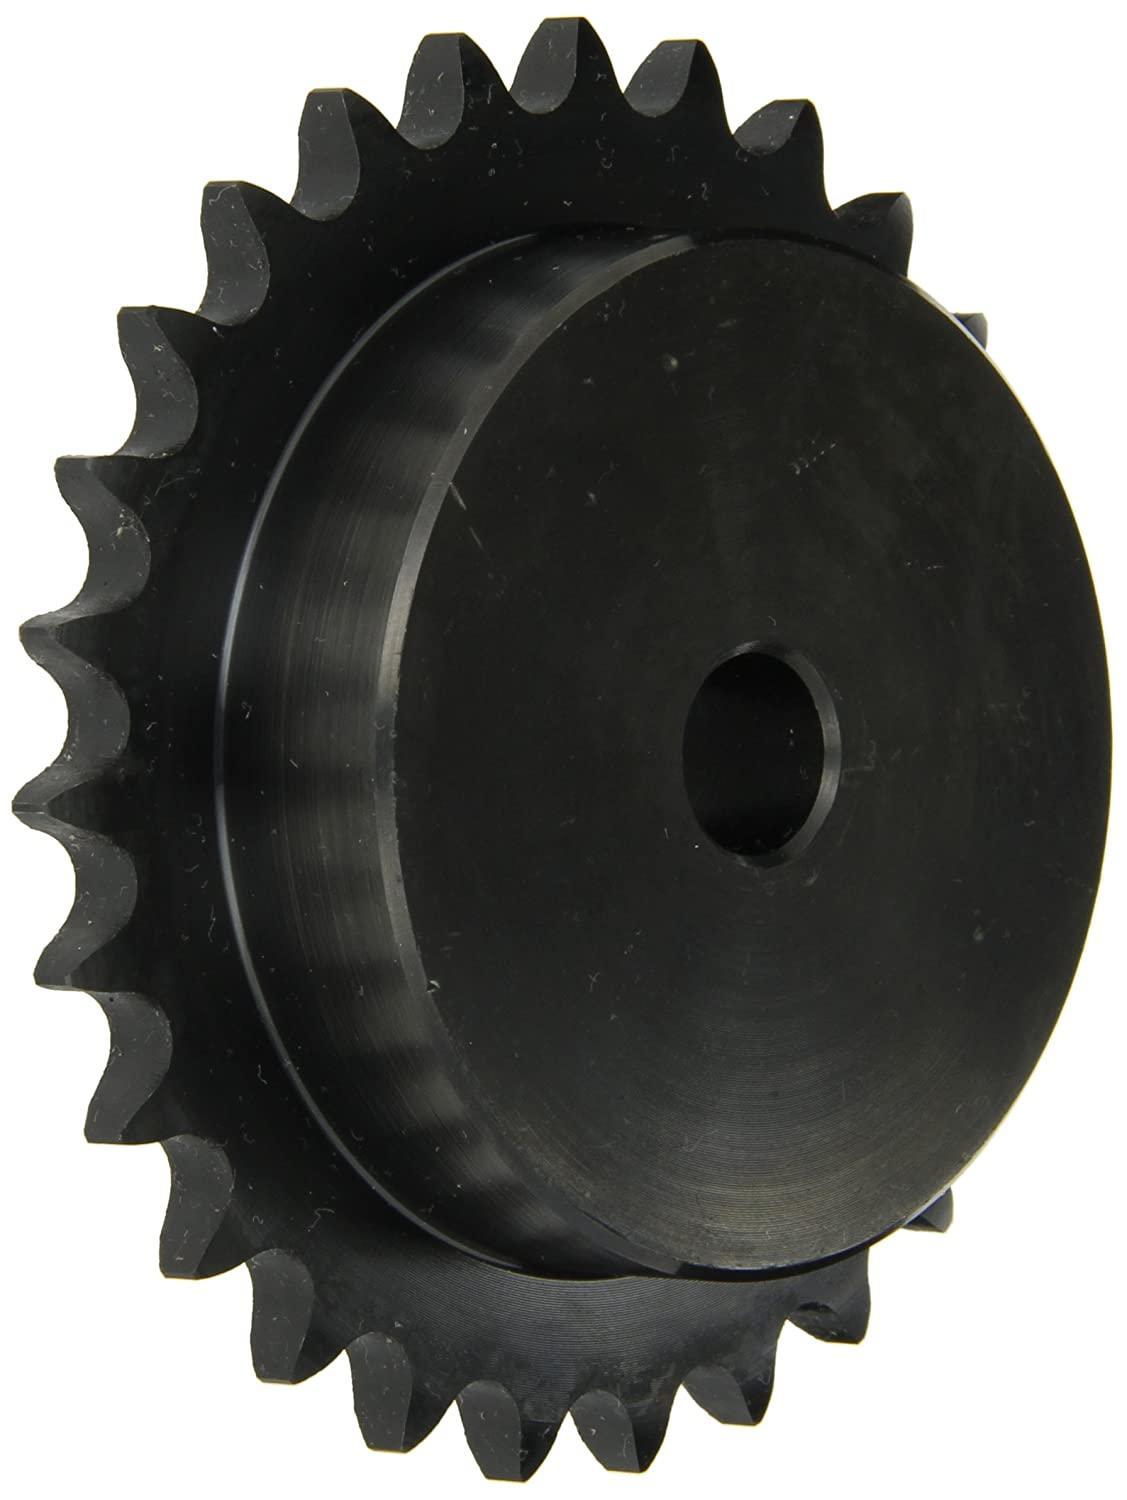 100B26 Roller Chain Sprocket With Stock Bore - Forces Inc